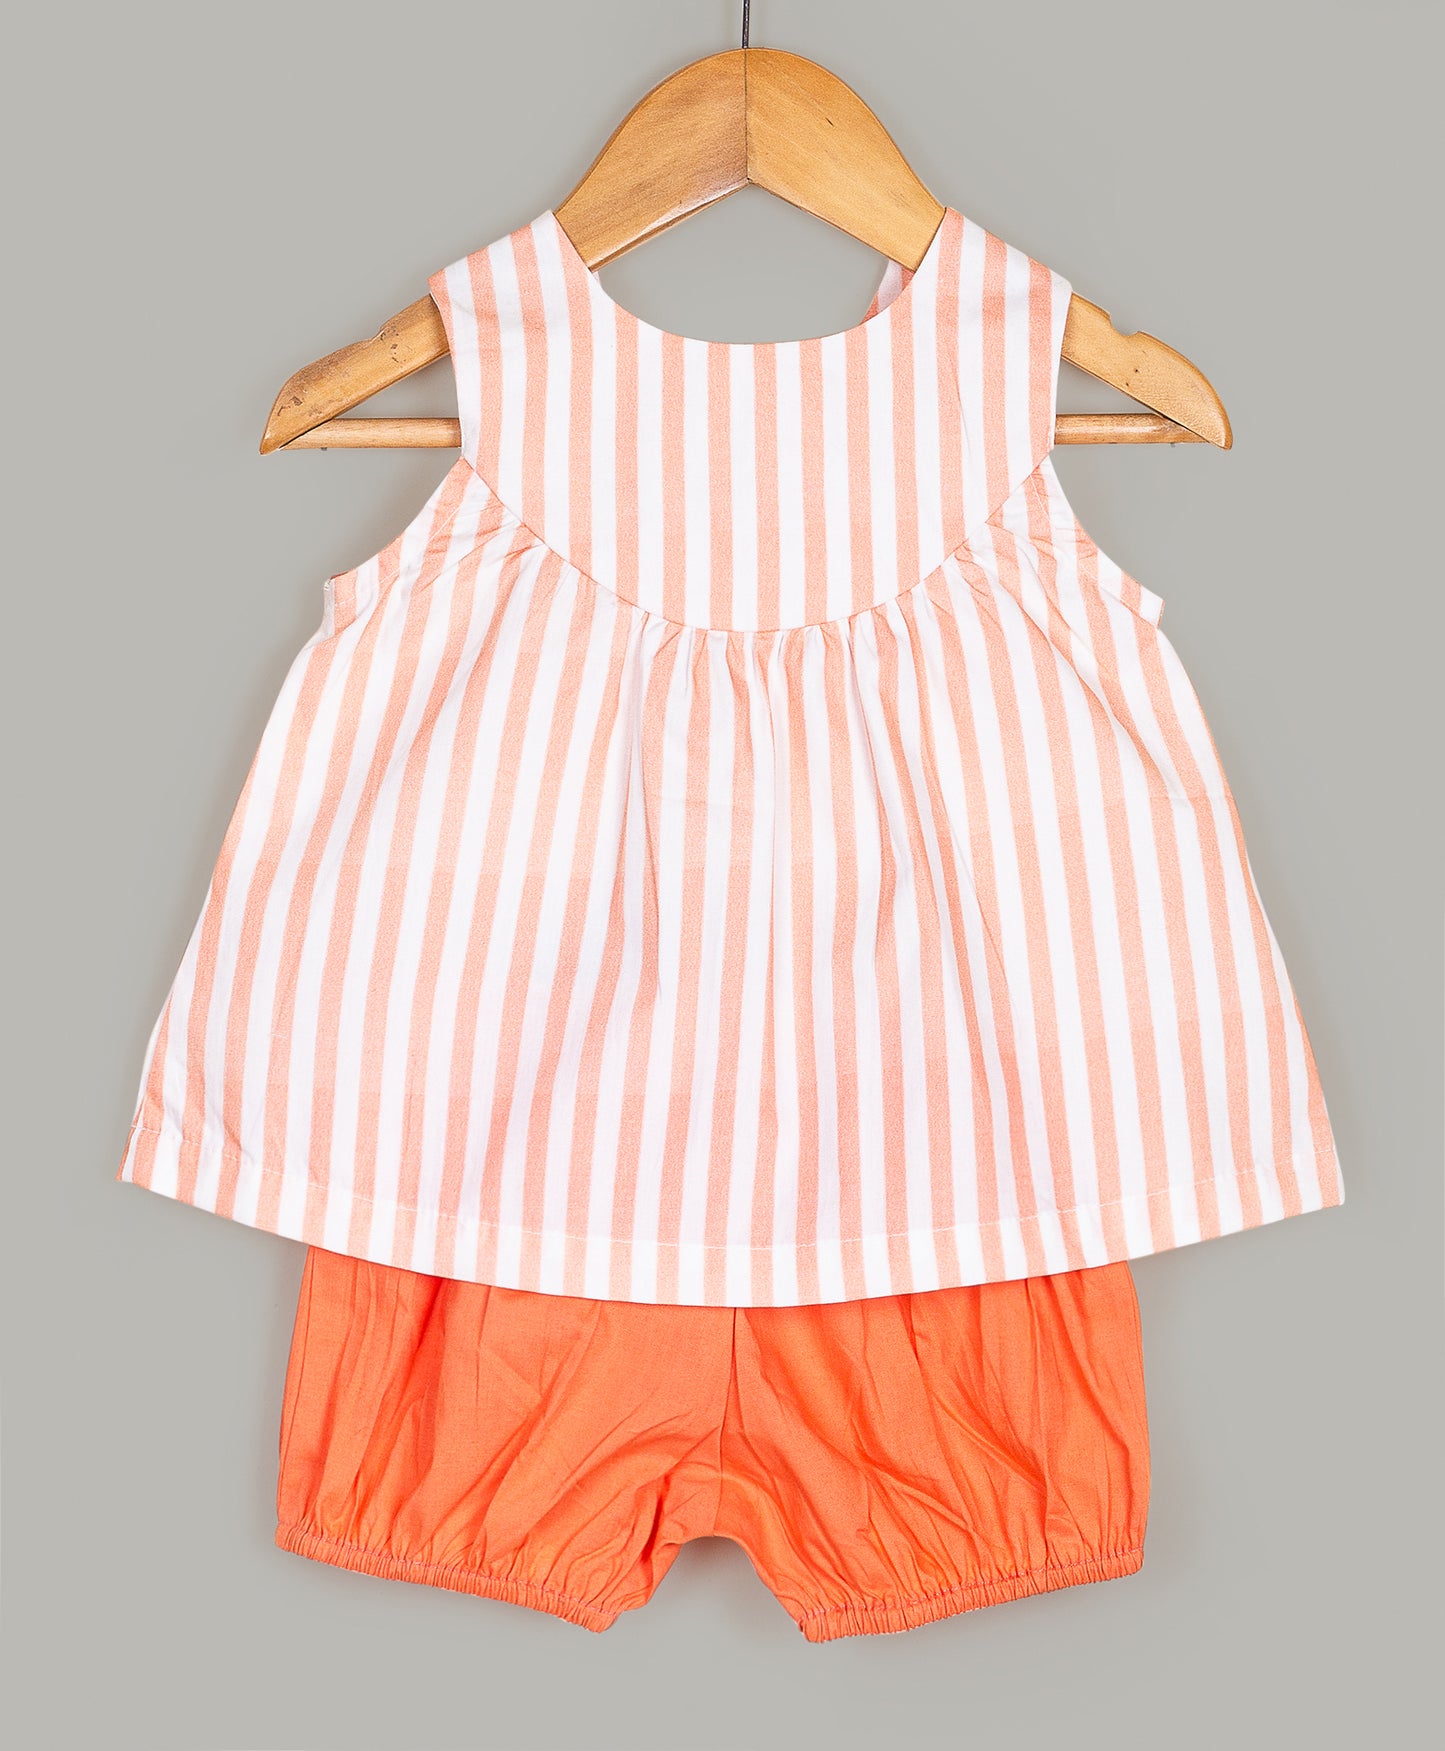 Stripe print top with elephant embroidery patch and orange shorts